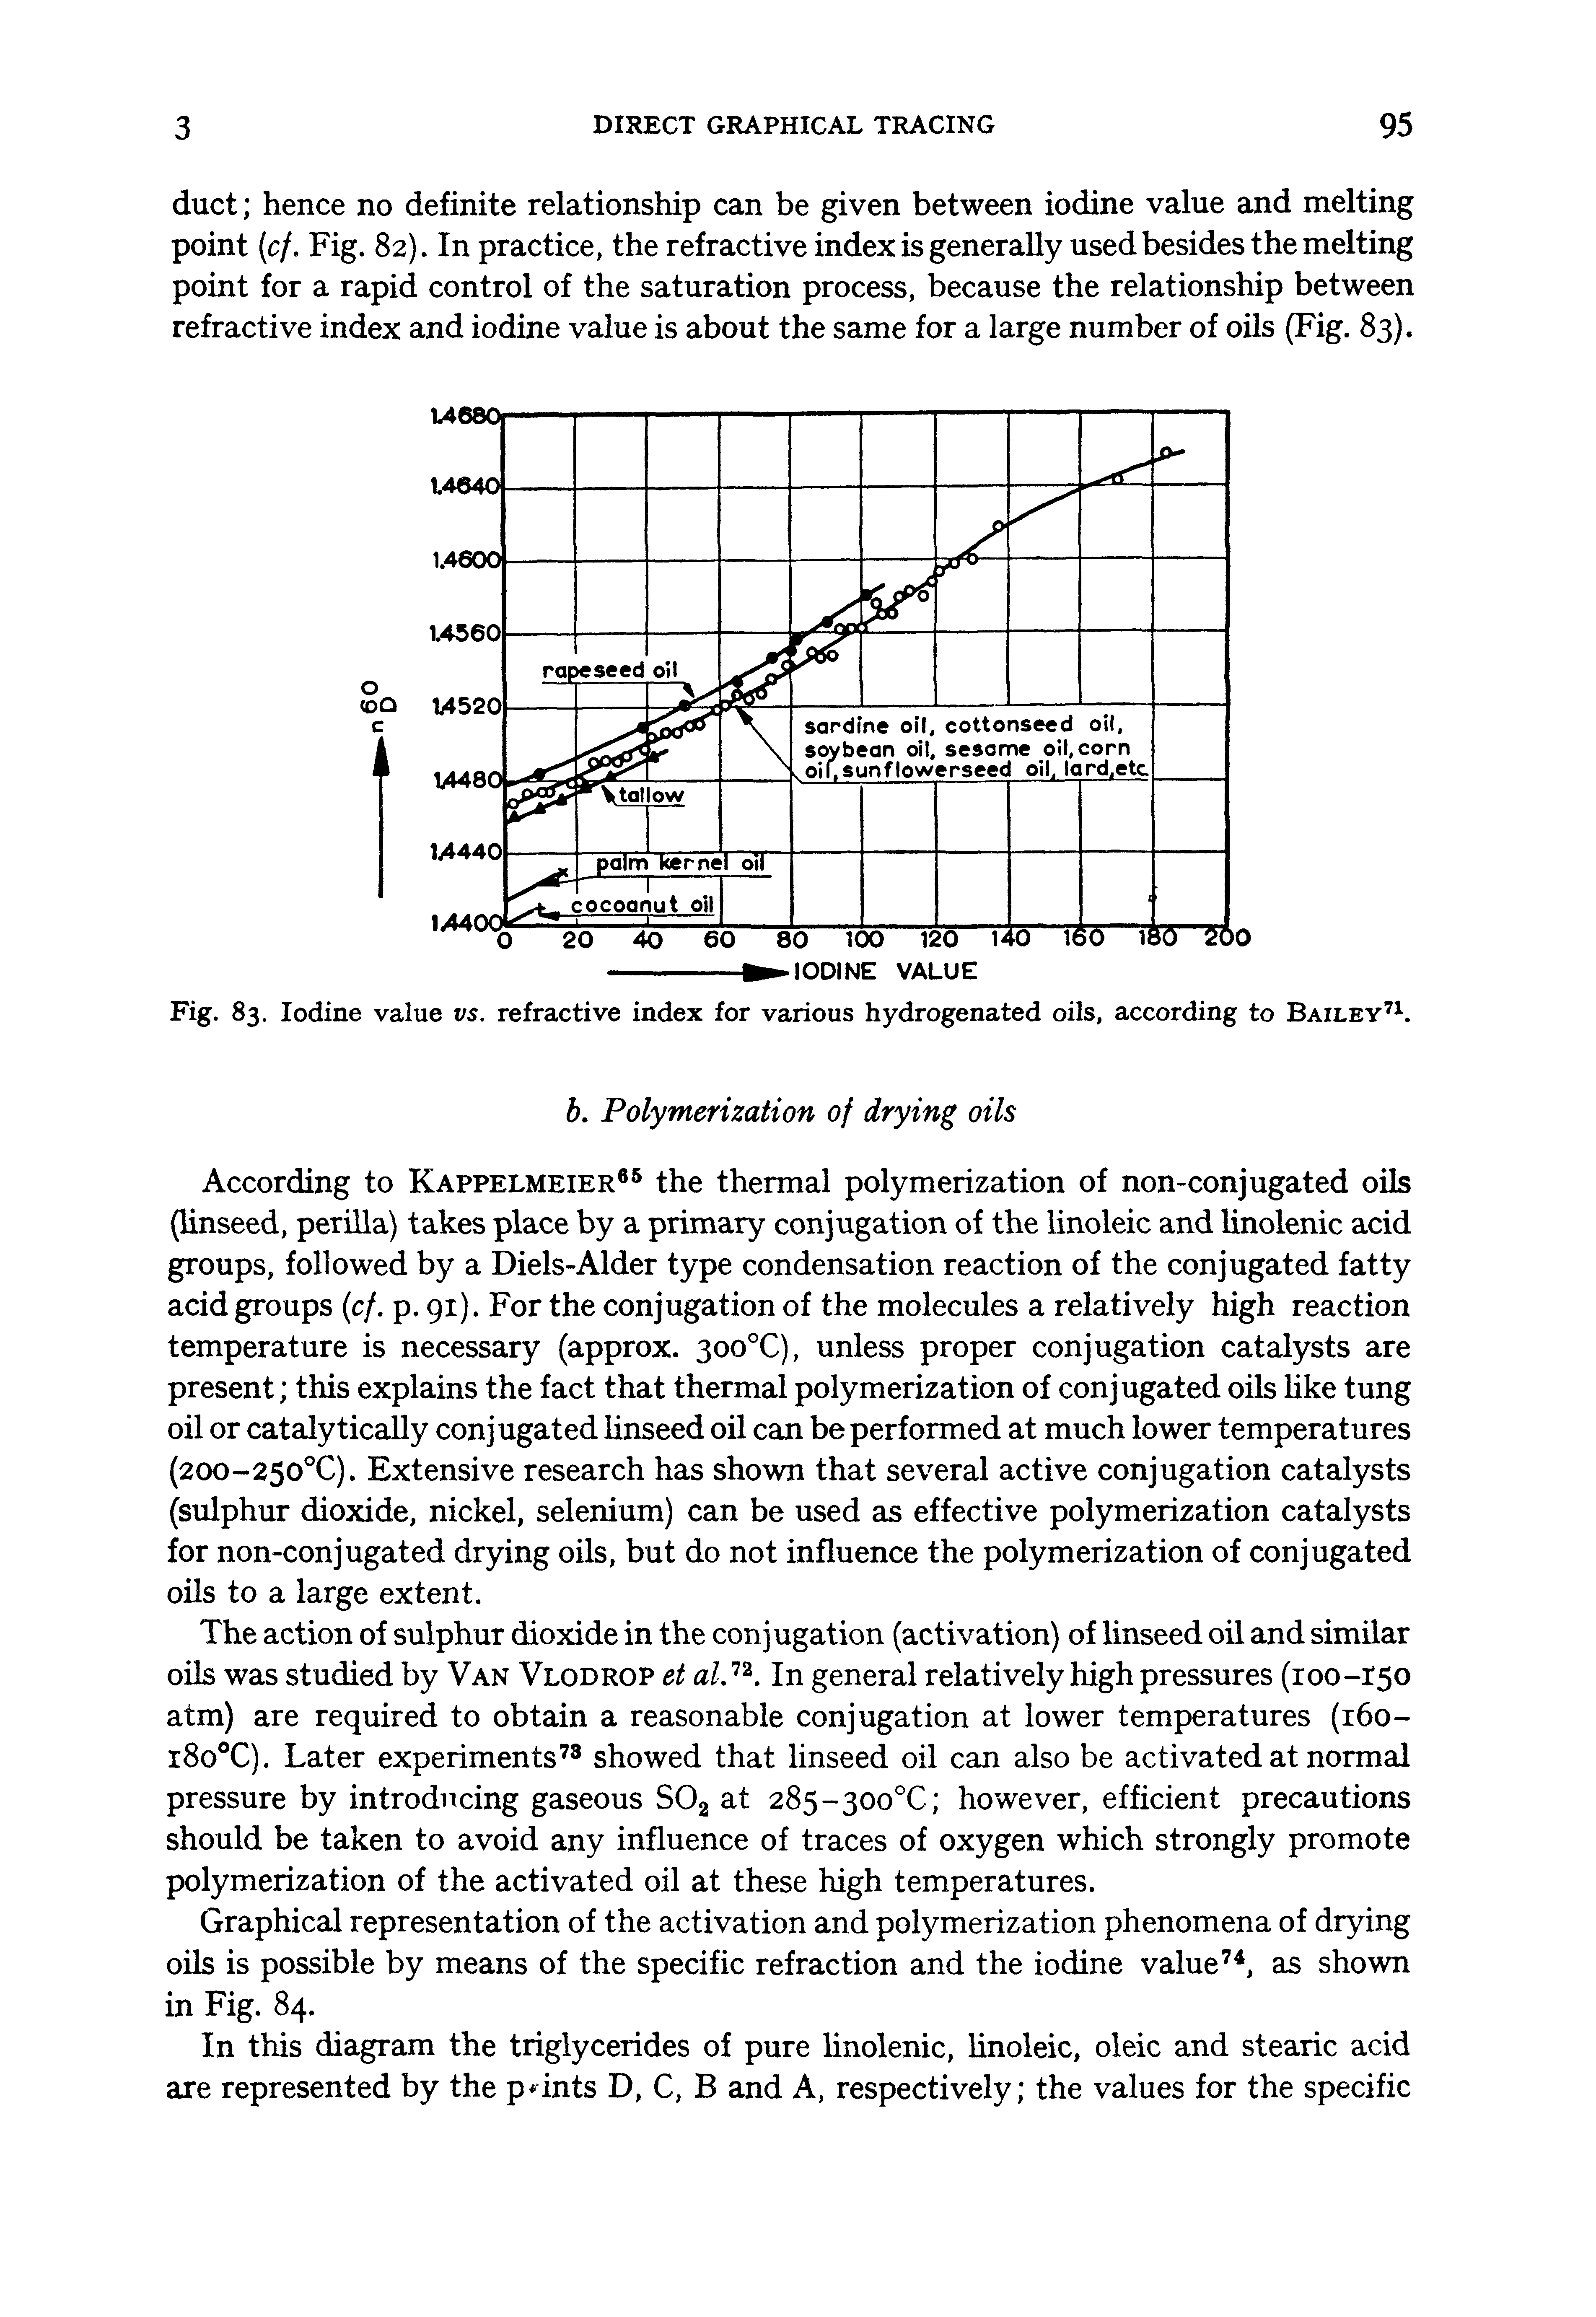 Fig. 83. Iodine value vs. refractive index for various hydrogenated oils, according to Bailey71.